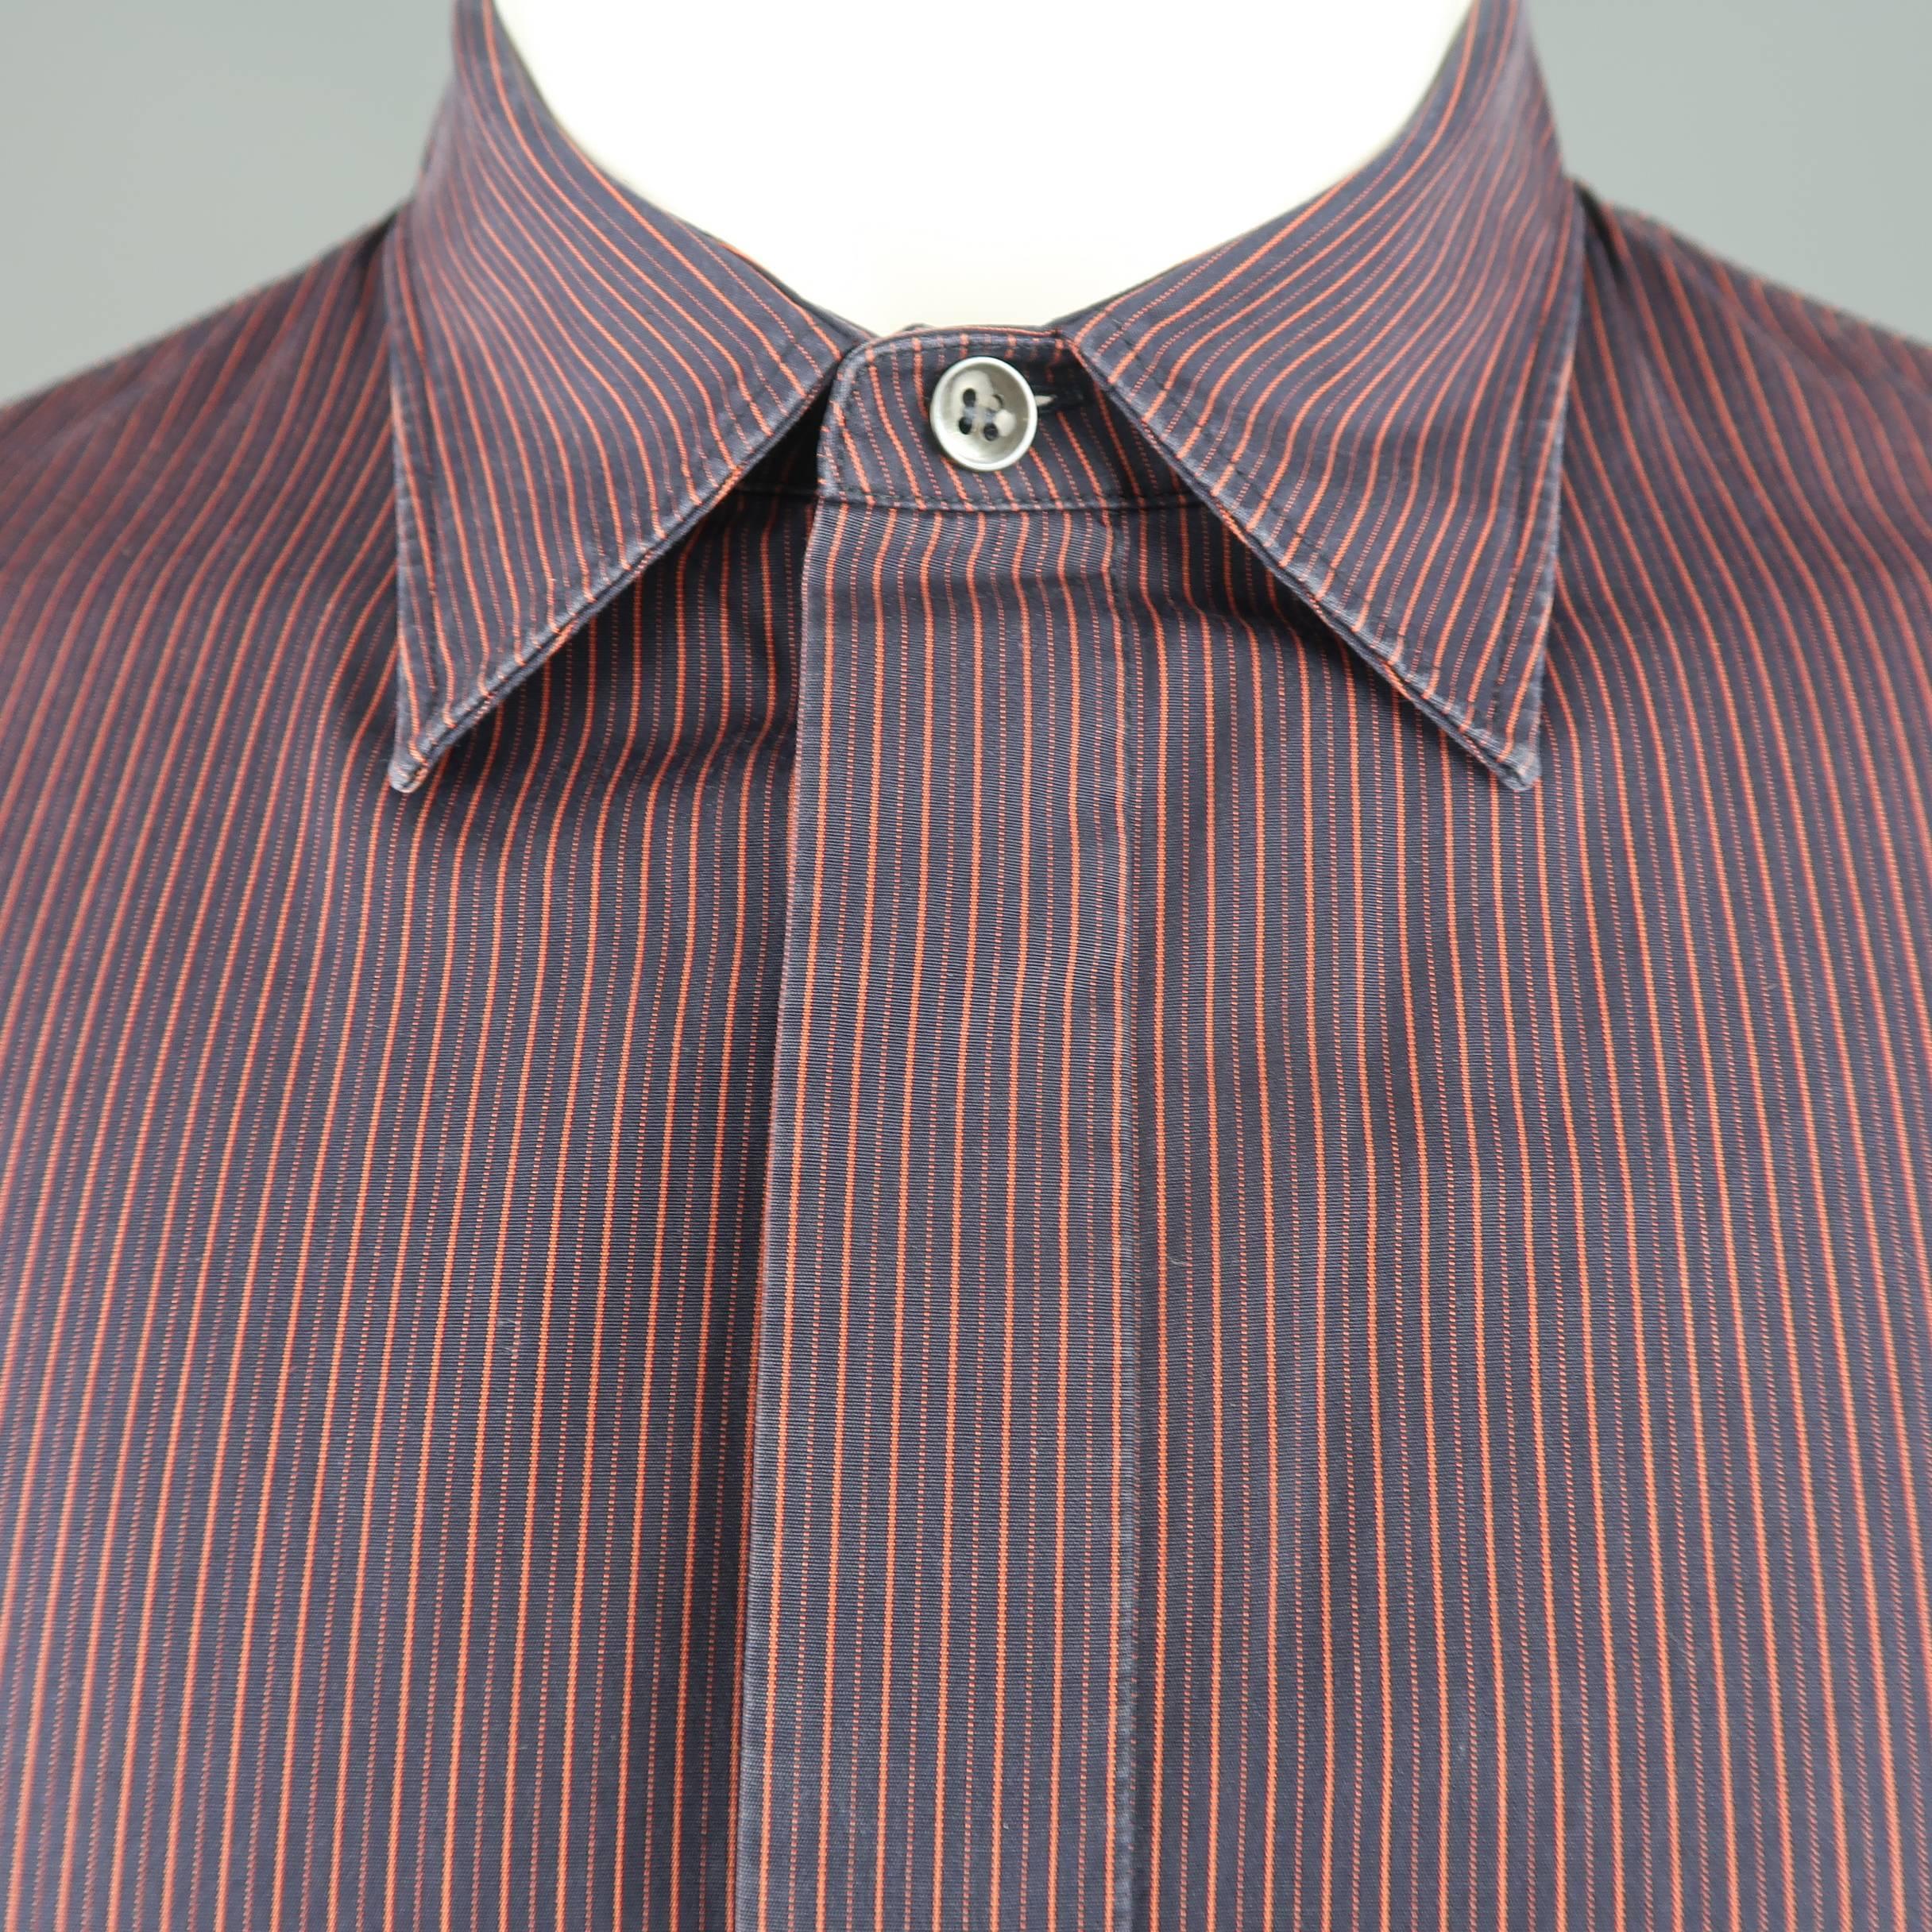 MAISON MARTIN MARGIELA shirt comes in navy and burgundy striped cotton with a pointed collar, hidden placket button up front, and signature stitch back. Made in Italy.
 
Good Pre-Owned Condition.
Marked: IT 50
 
Measurements:
 
Shoulder: 19